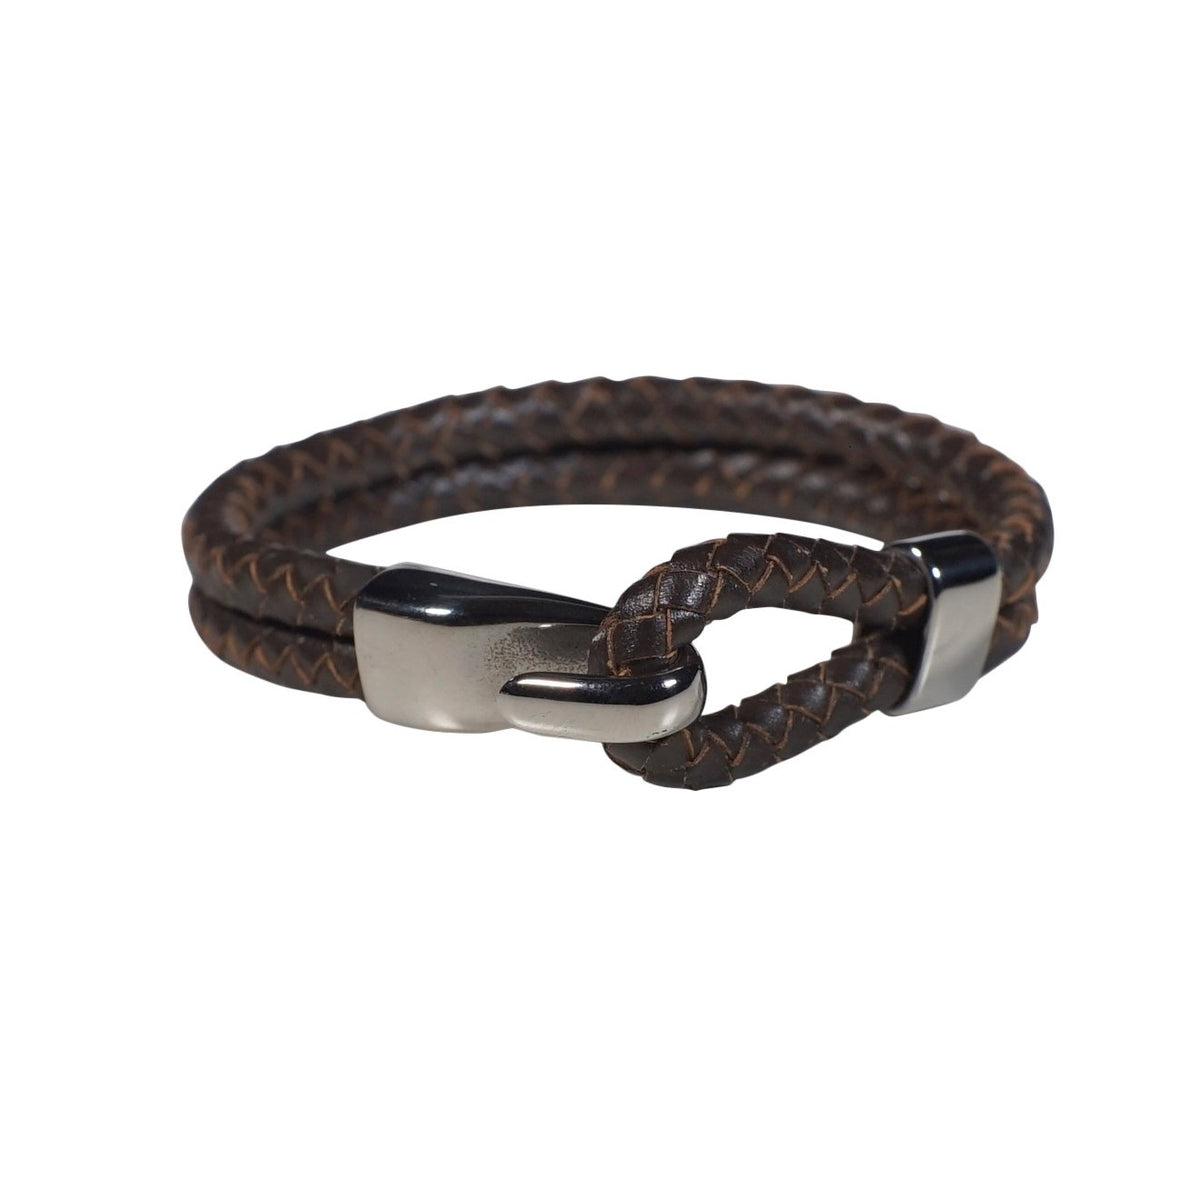 Oxford Leather Bracelet in Brown (Size L) - Nomad Watch Works Malaysia